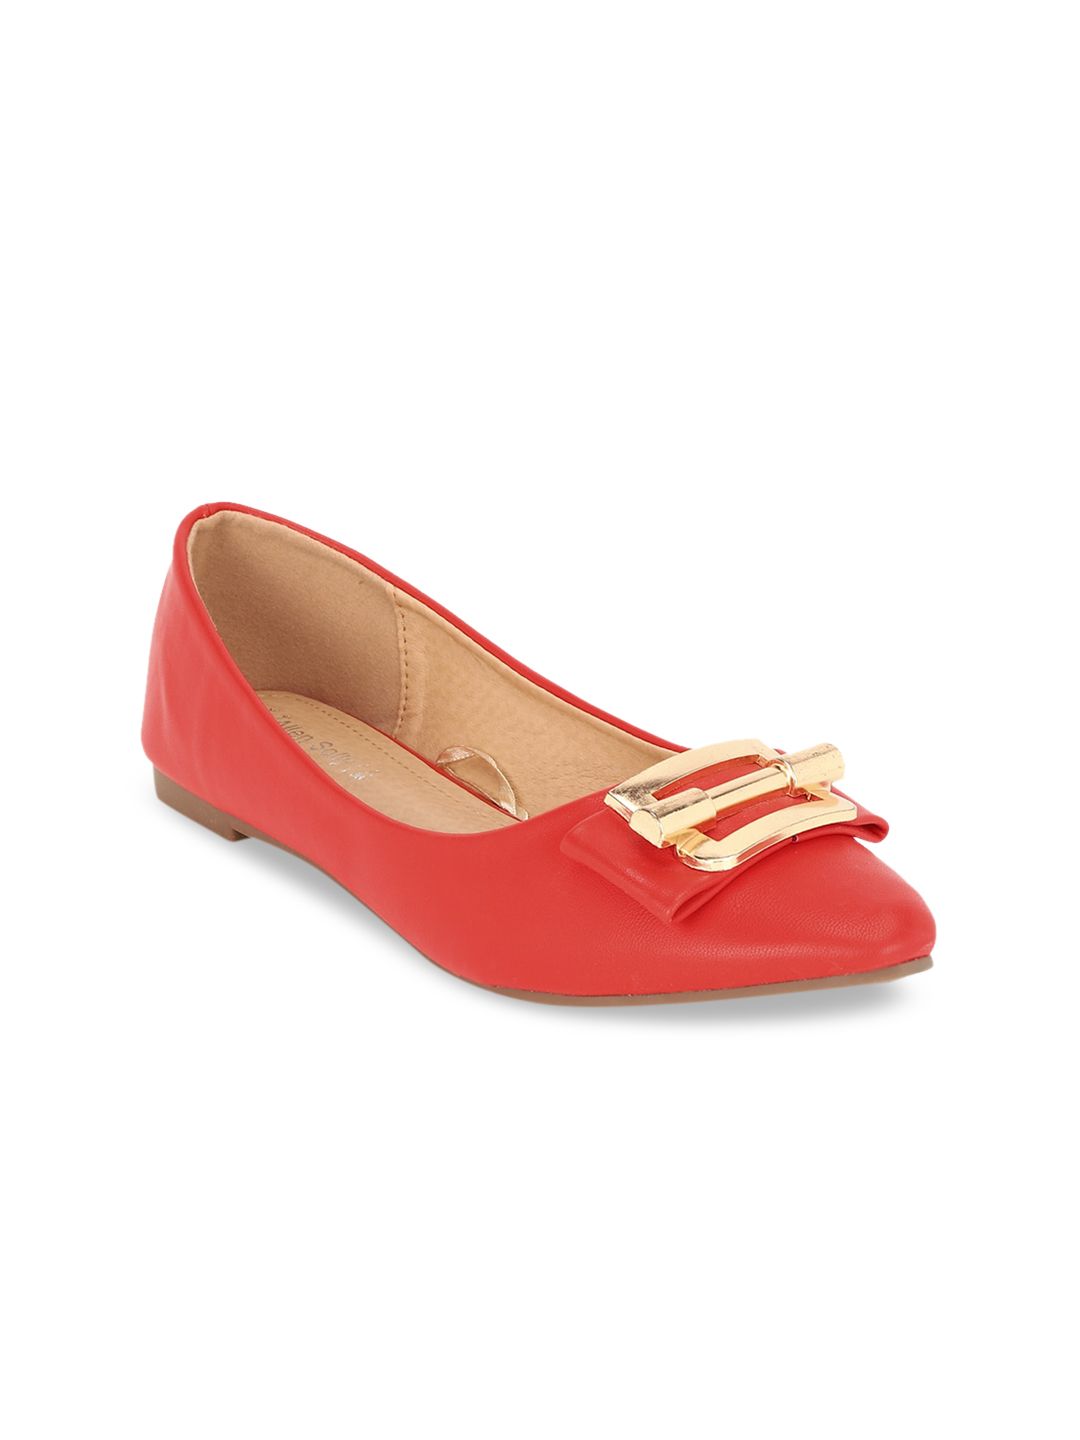 Allen Solly Woman Women Red PU Driving Shoes Price in India